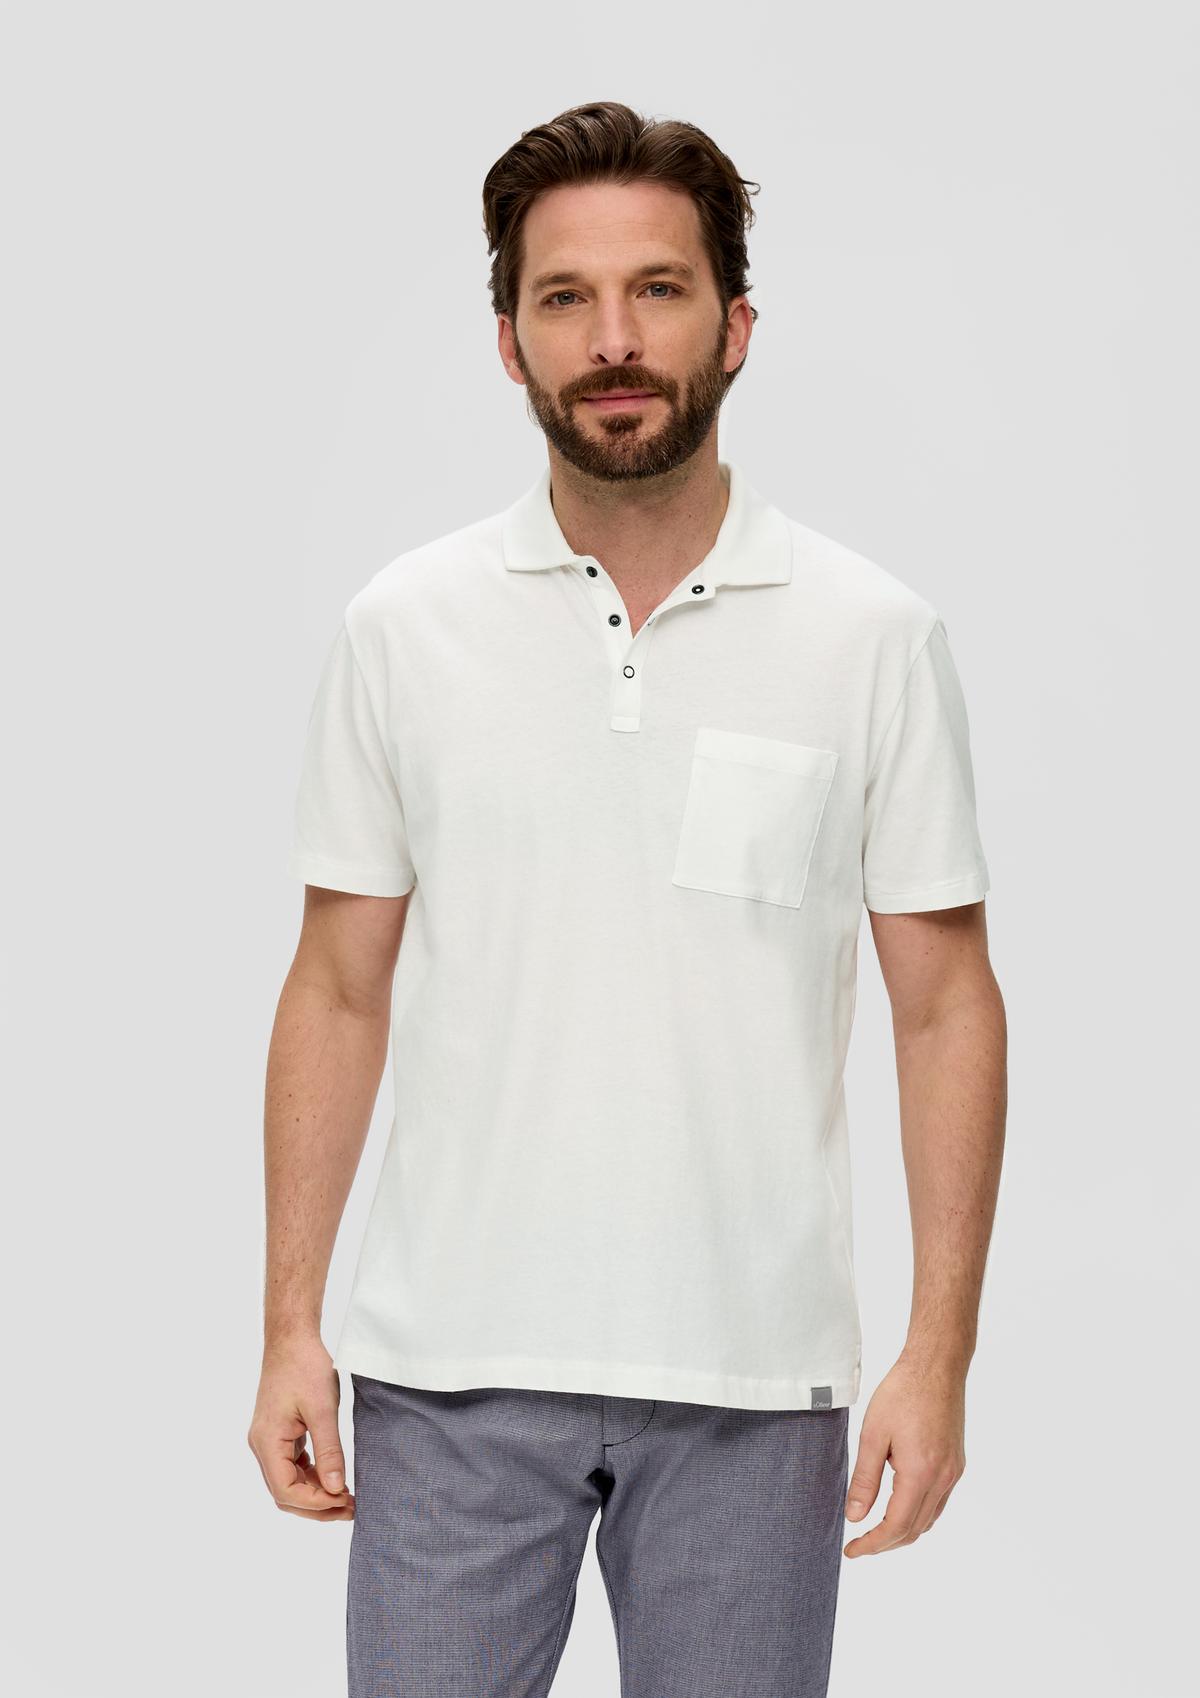 Polo shirt with a breast pockets